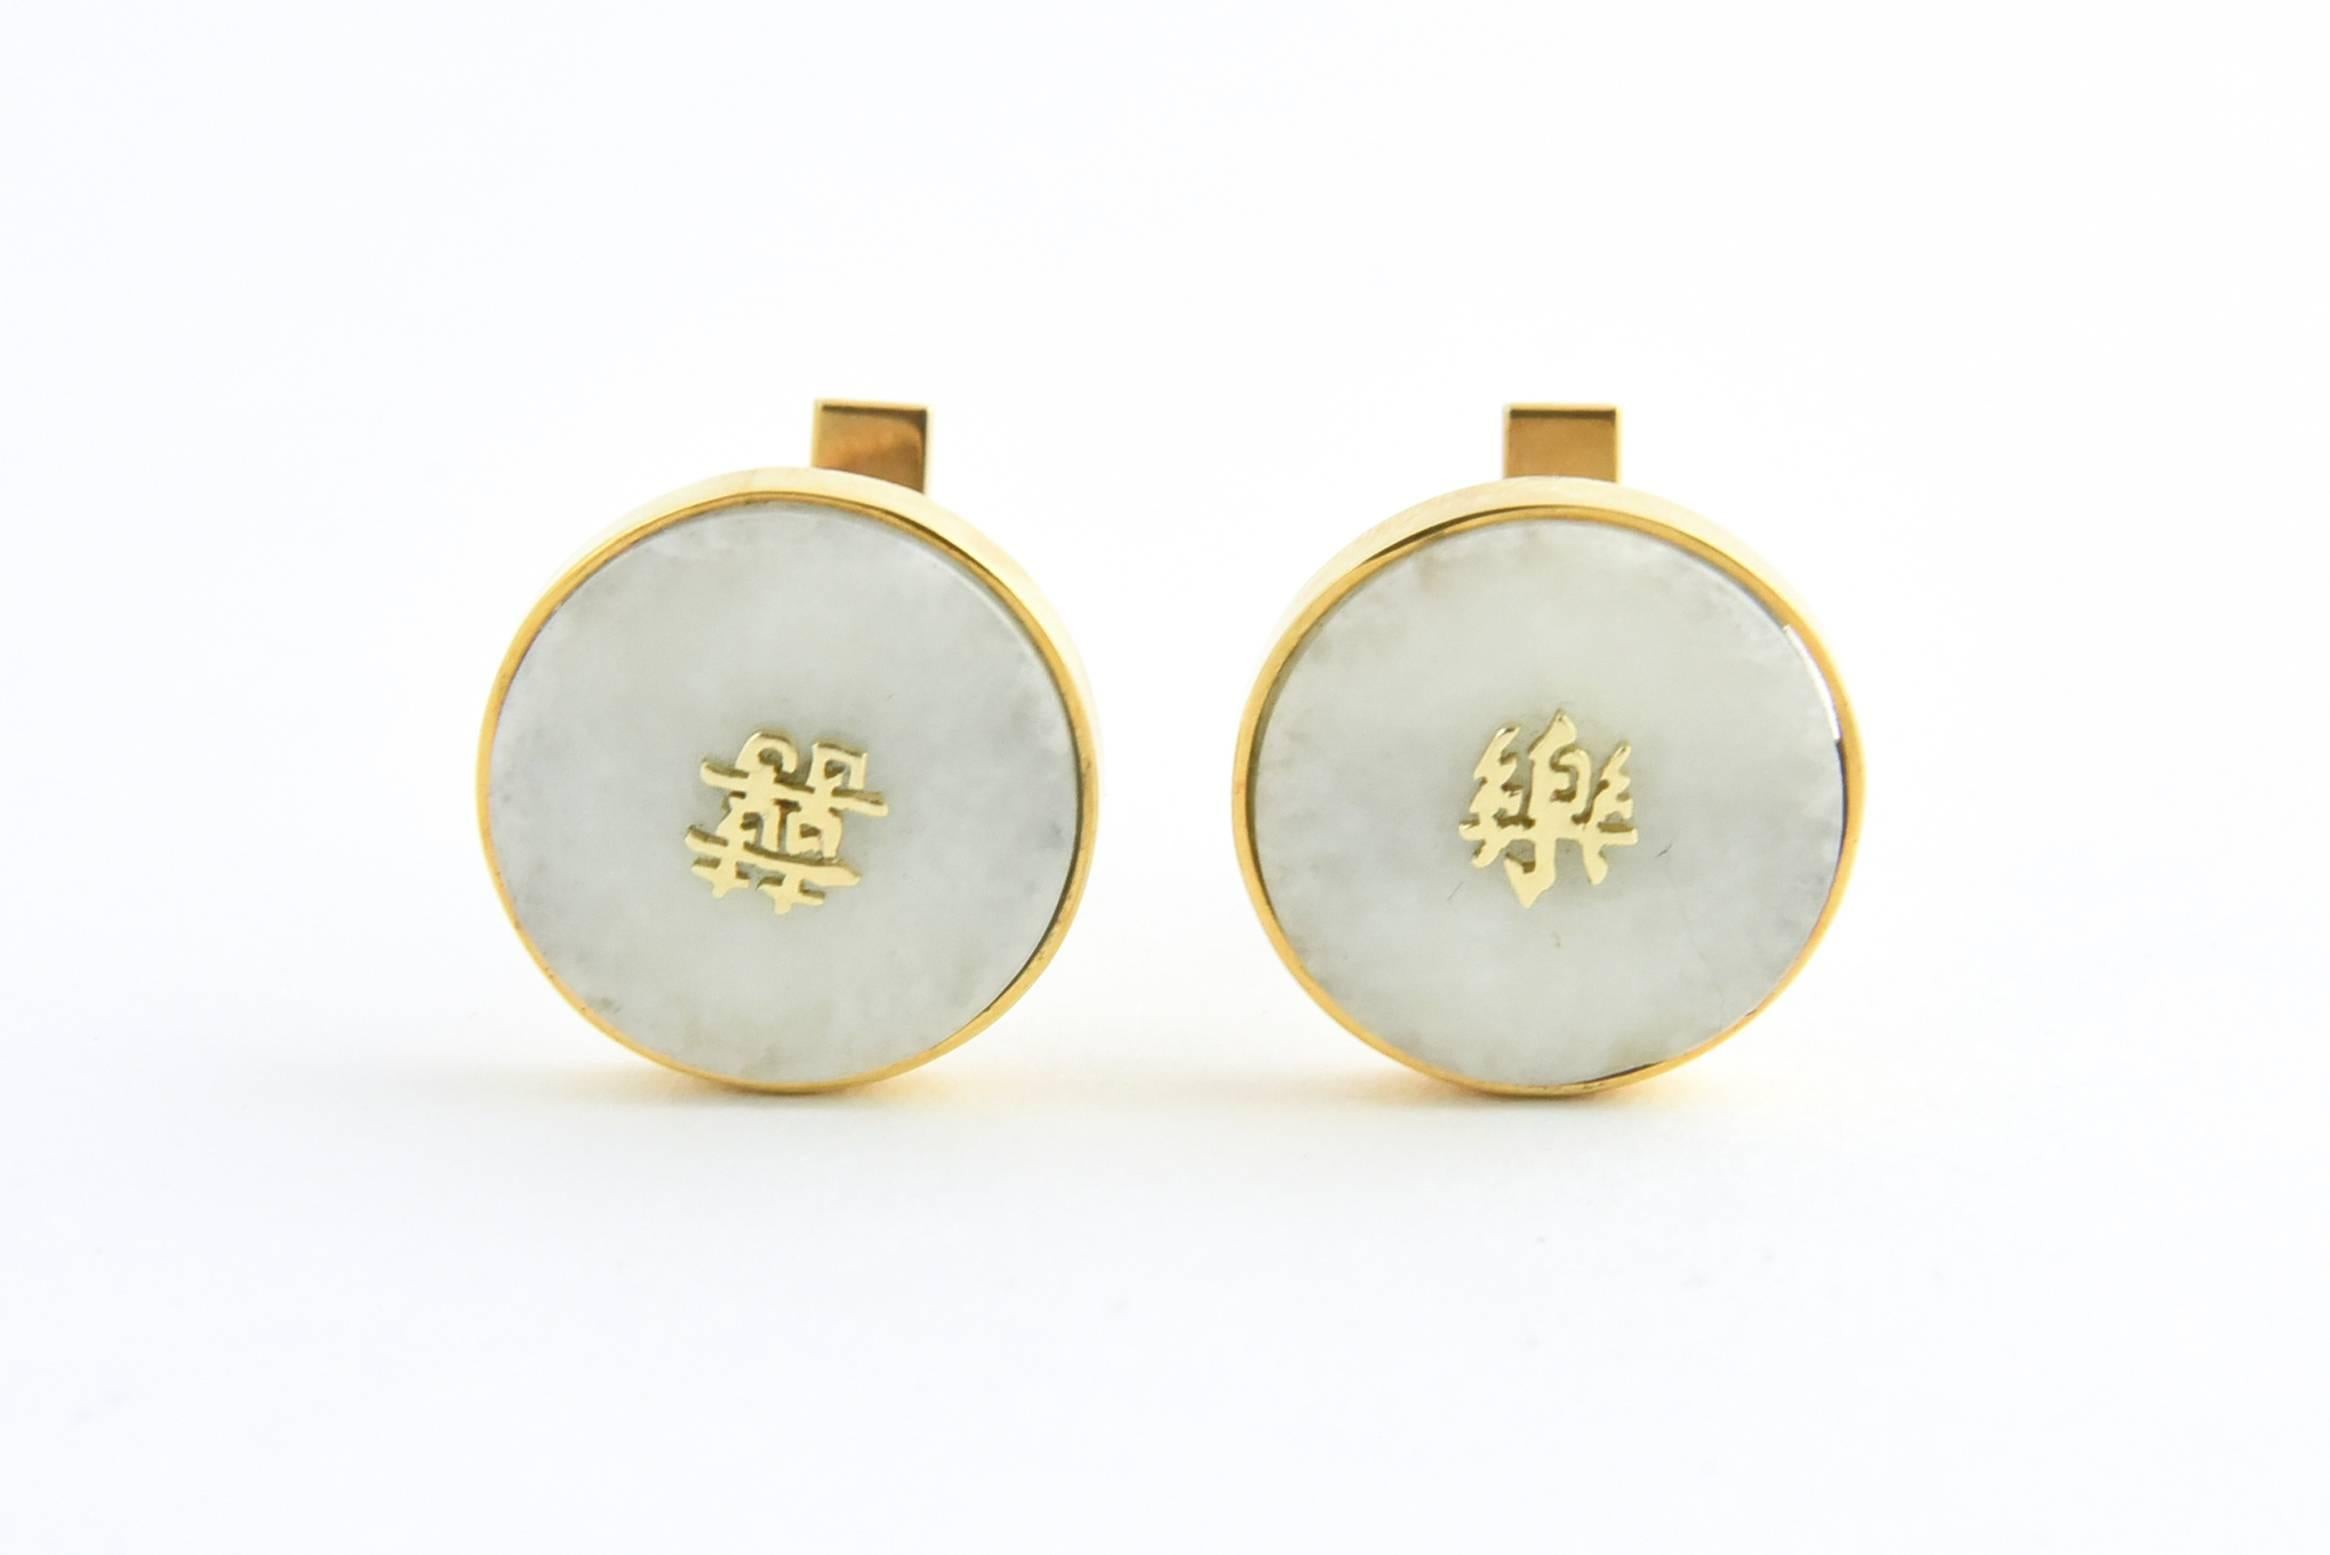 Cuff links featuring jade green disks with 14K yellow gold Chinese characters mounted in a 14K gold bezel.